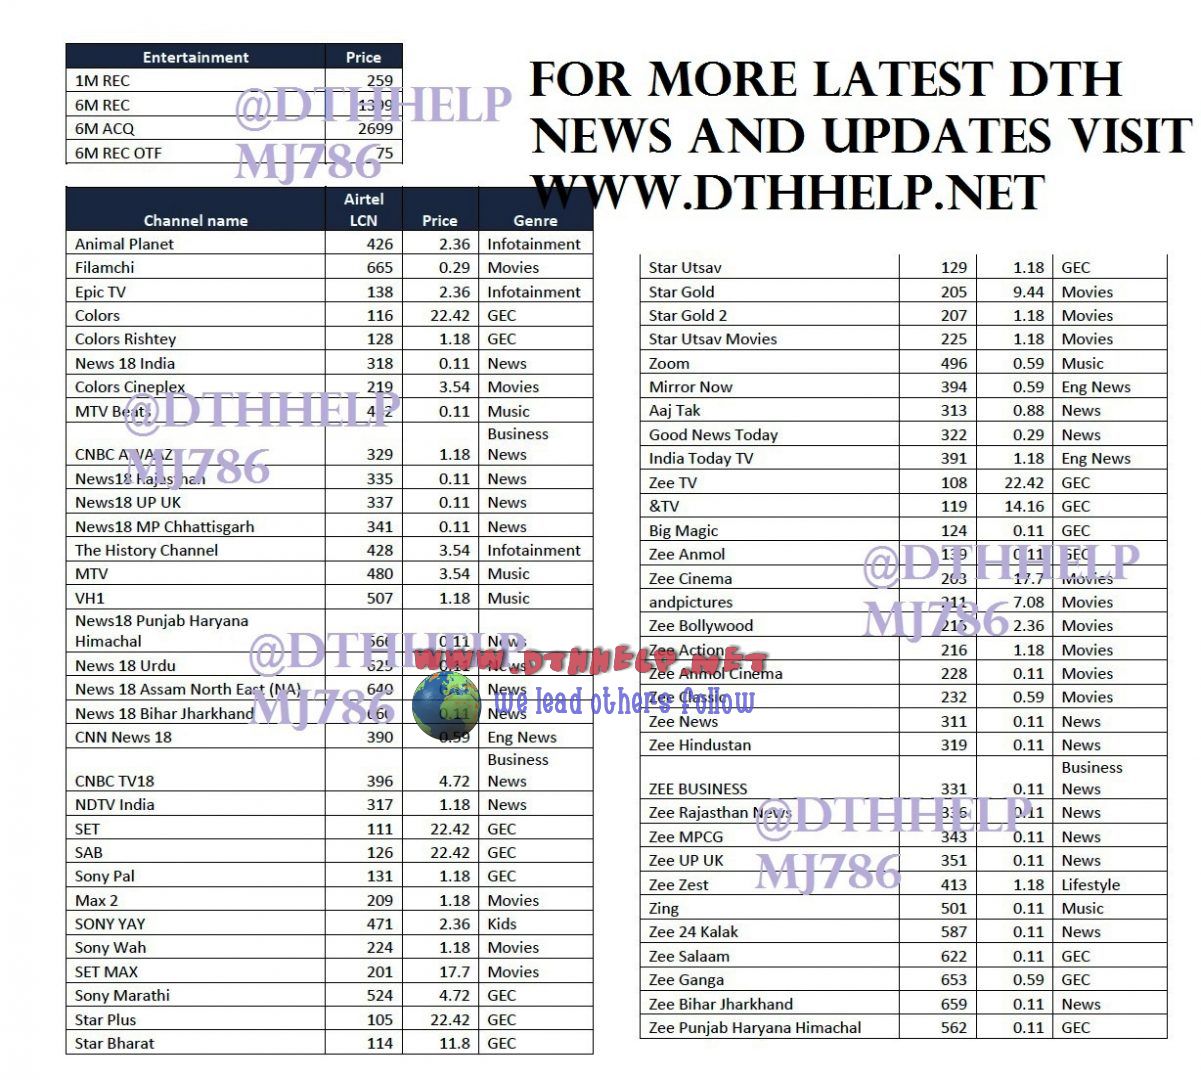 Airtel Digital TV launches 4 New plans named “Entertainment”, “Family”,  “Premium Family” and “Mega” packs, may discontinue old packages – dthhelp  for dth news and dth updates